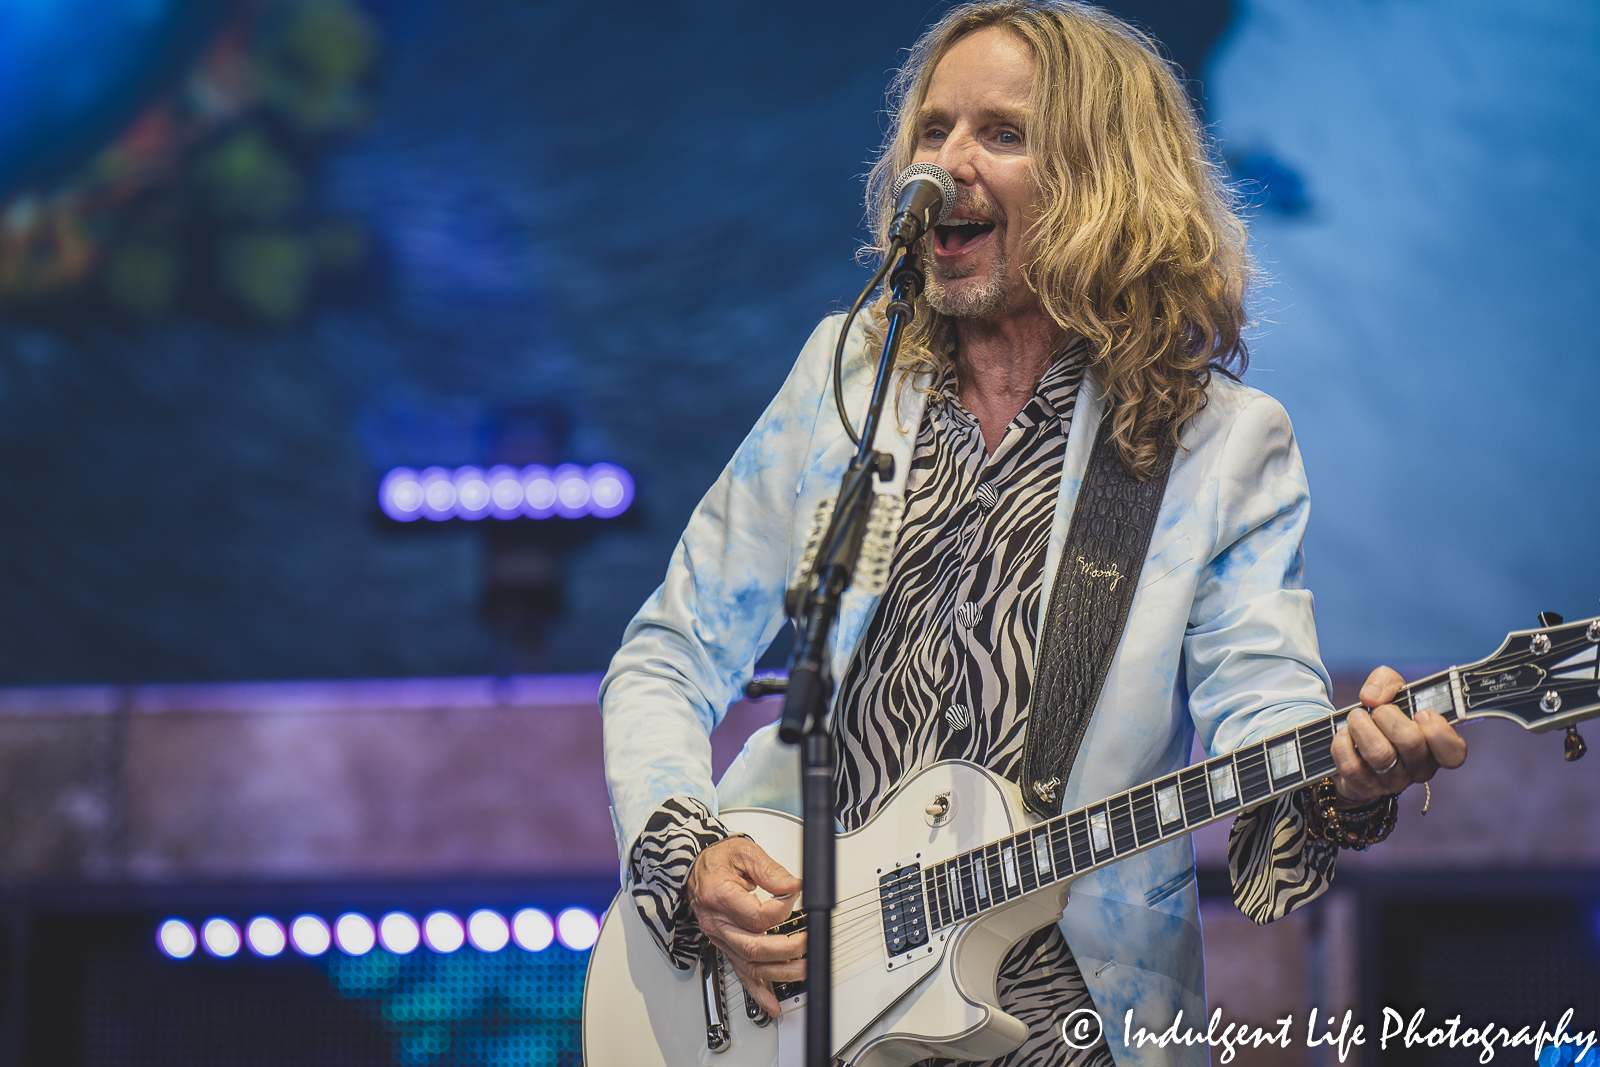 Styx frontman and guitarist Tommy Shaw performing live in concert at Starlight Theatre in Kansas City, MO on June 14, 2022.